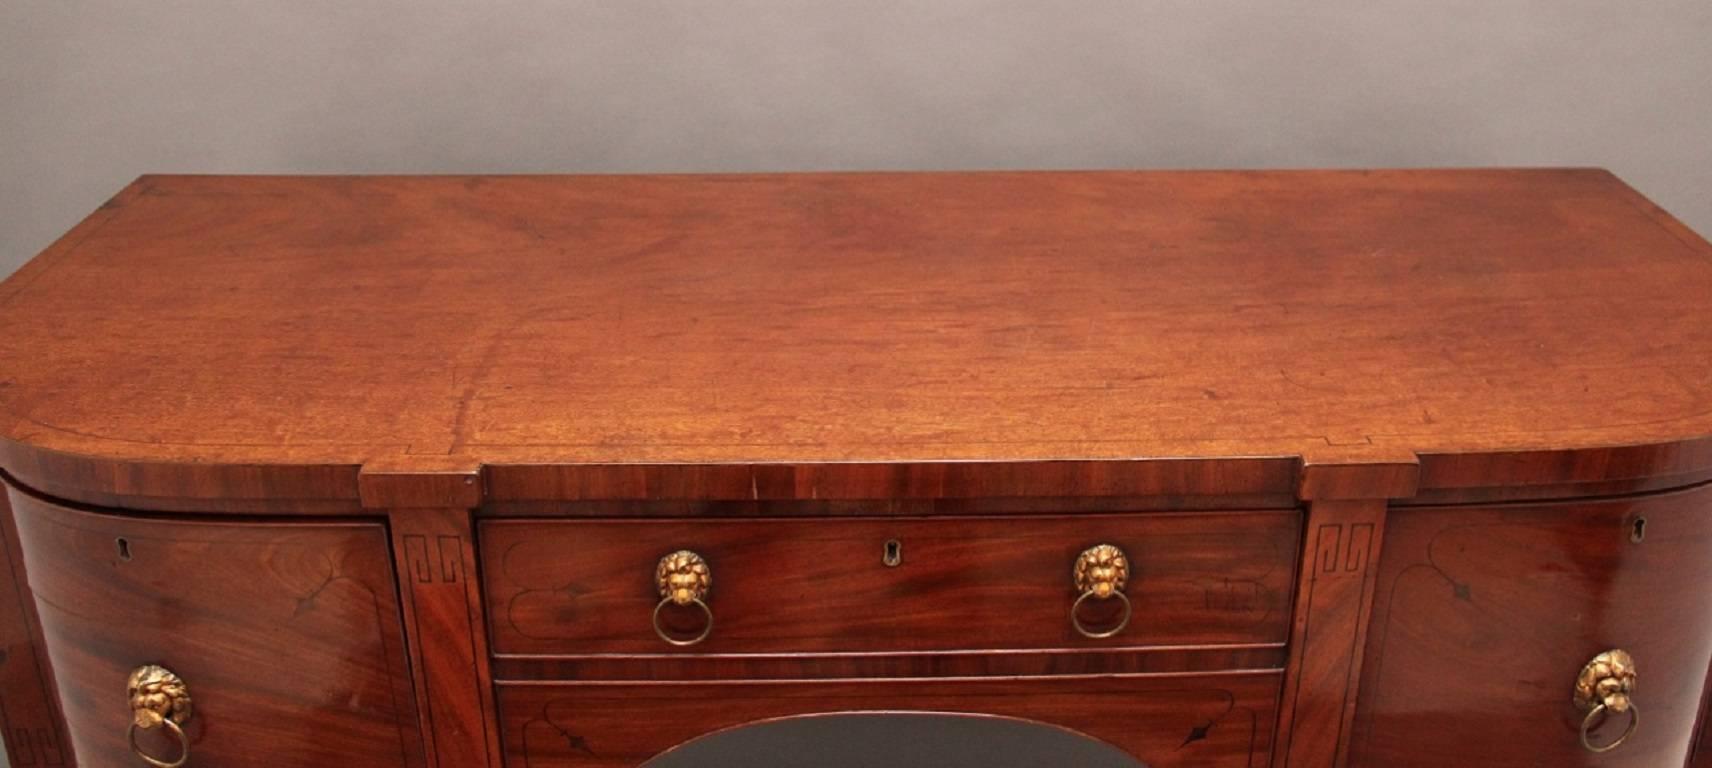 Regency 19th Century Mahogany Inlaid Bow Ended Sideboard